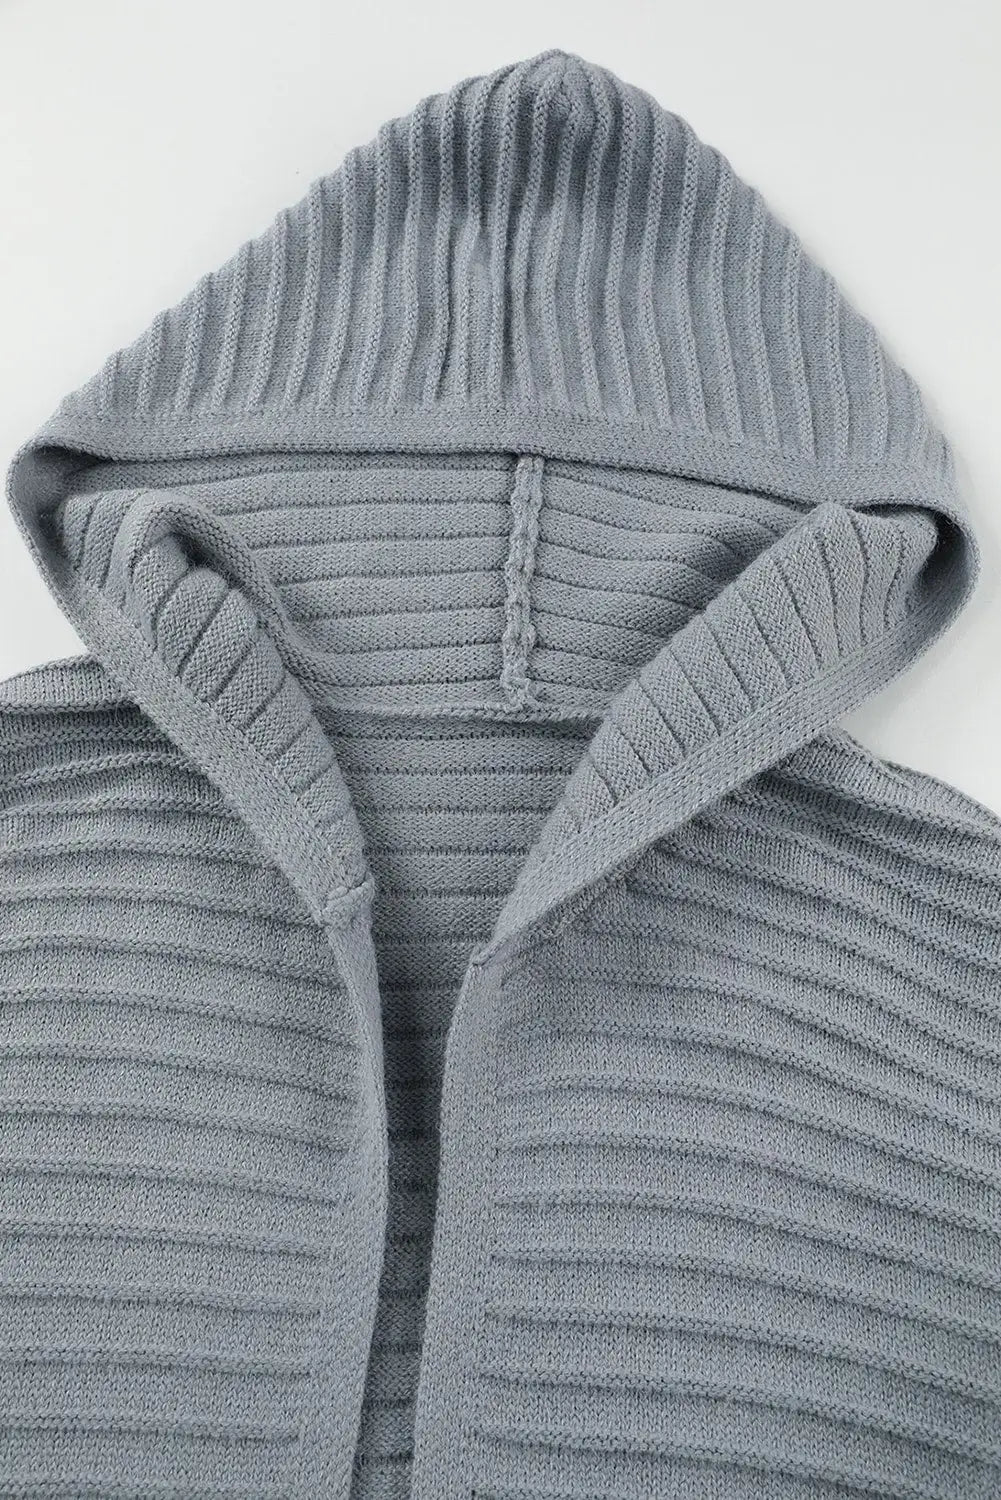 Gray horizontal rib knitted open front hooded cardigan - sweaters & cardigans